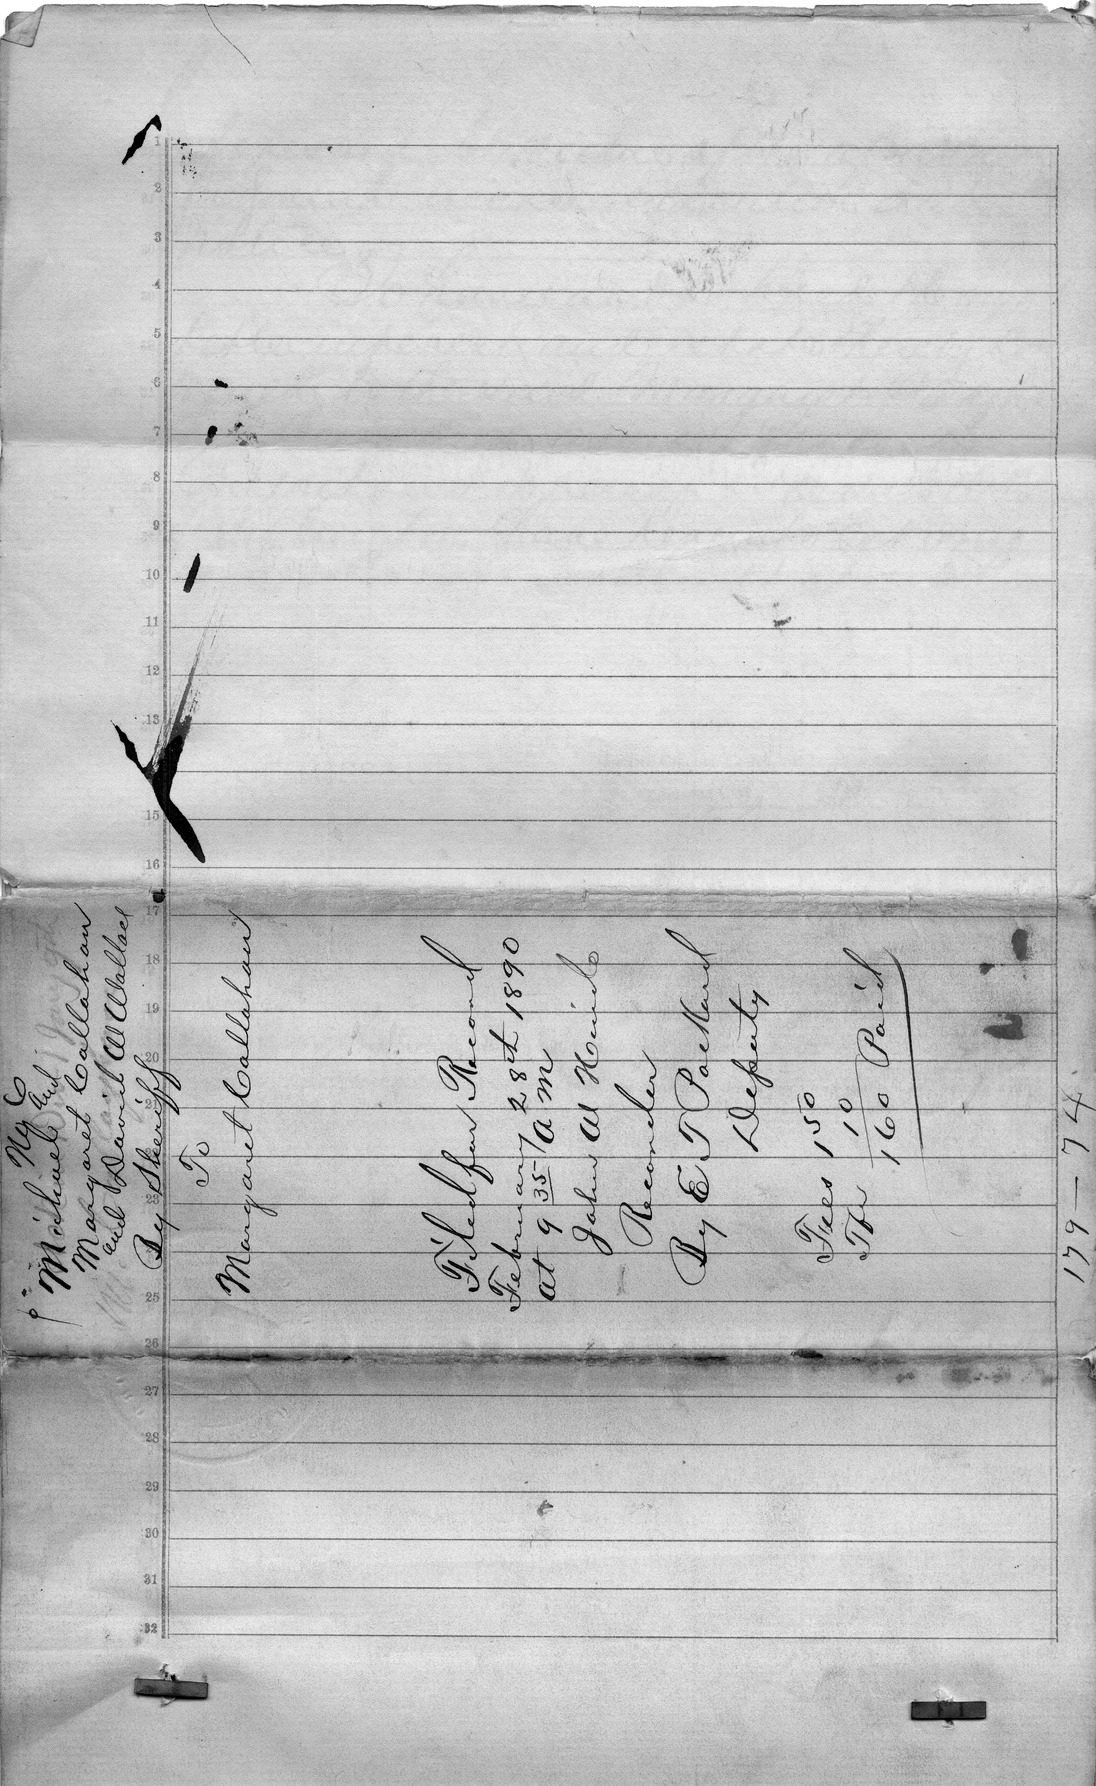 Sheriff's Deed from Michael and Margaret Callahan and David W. Wallace to Margaret Callahan